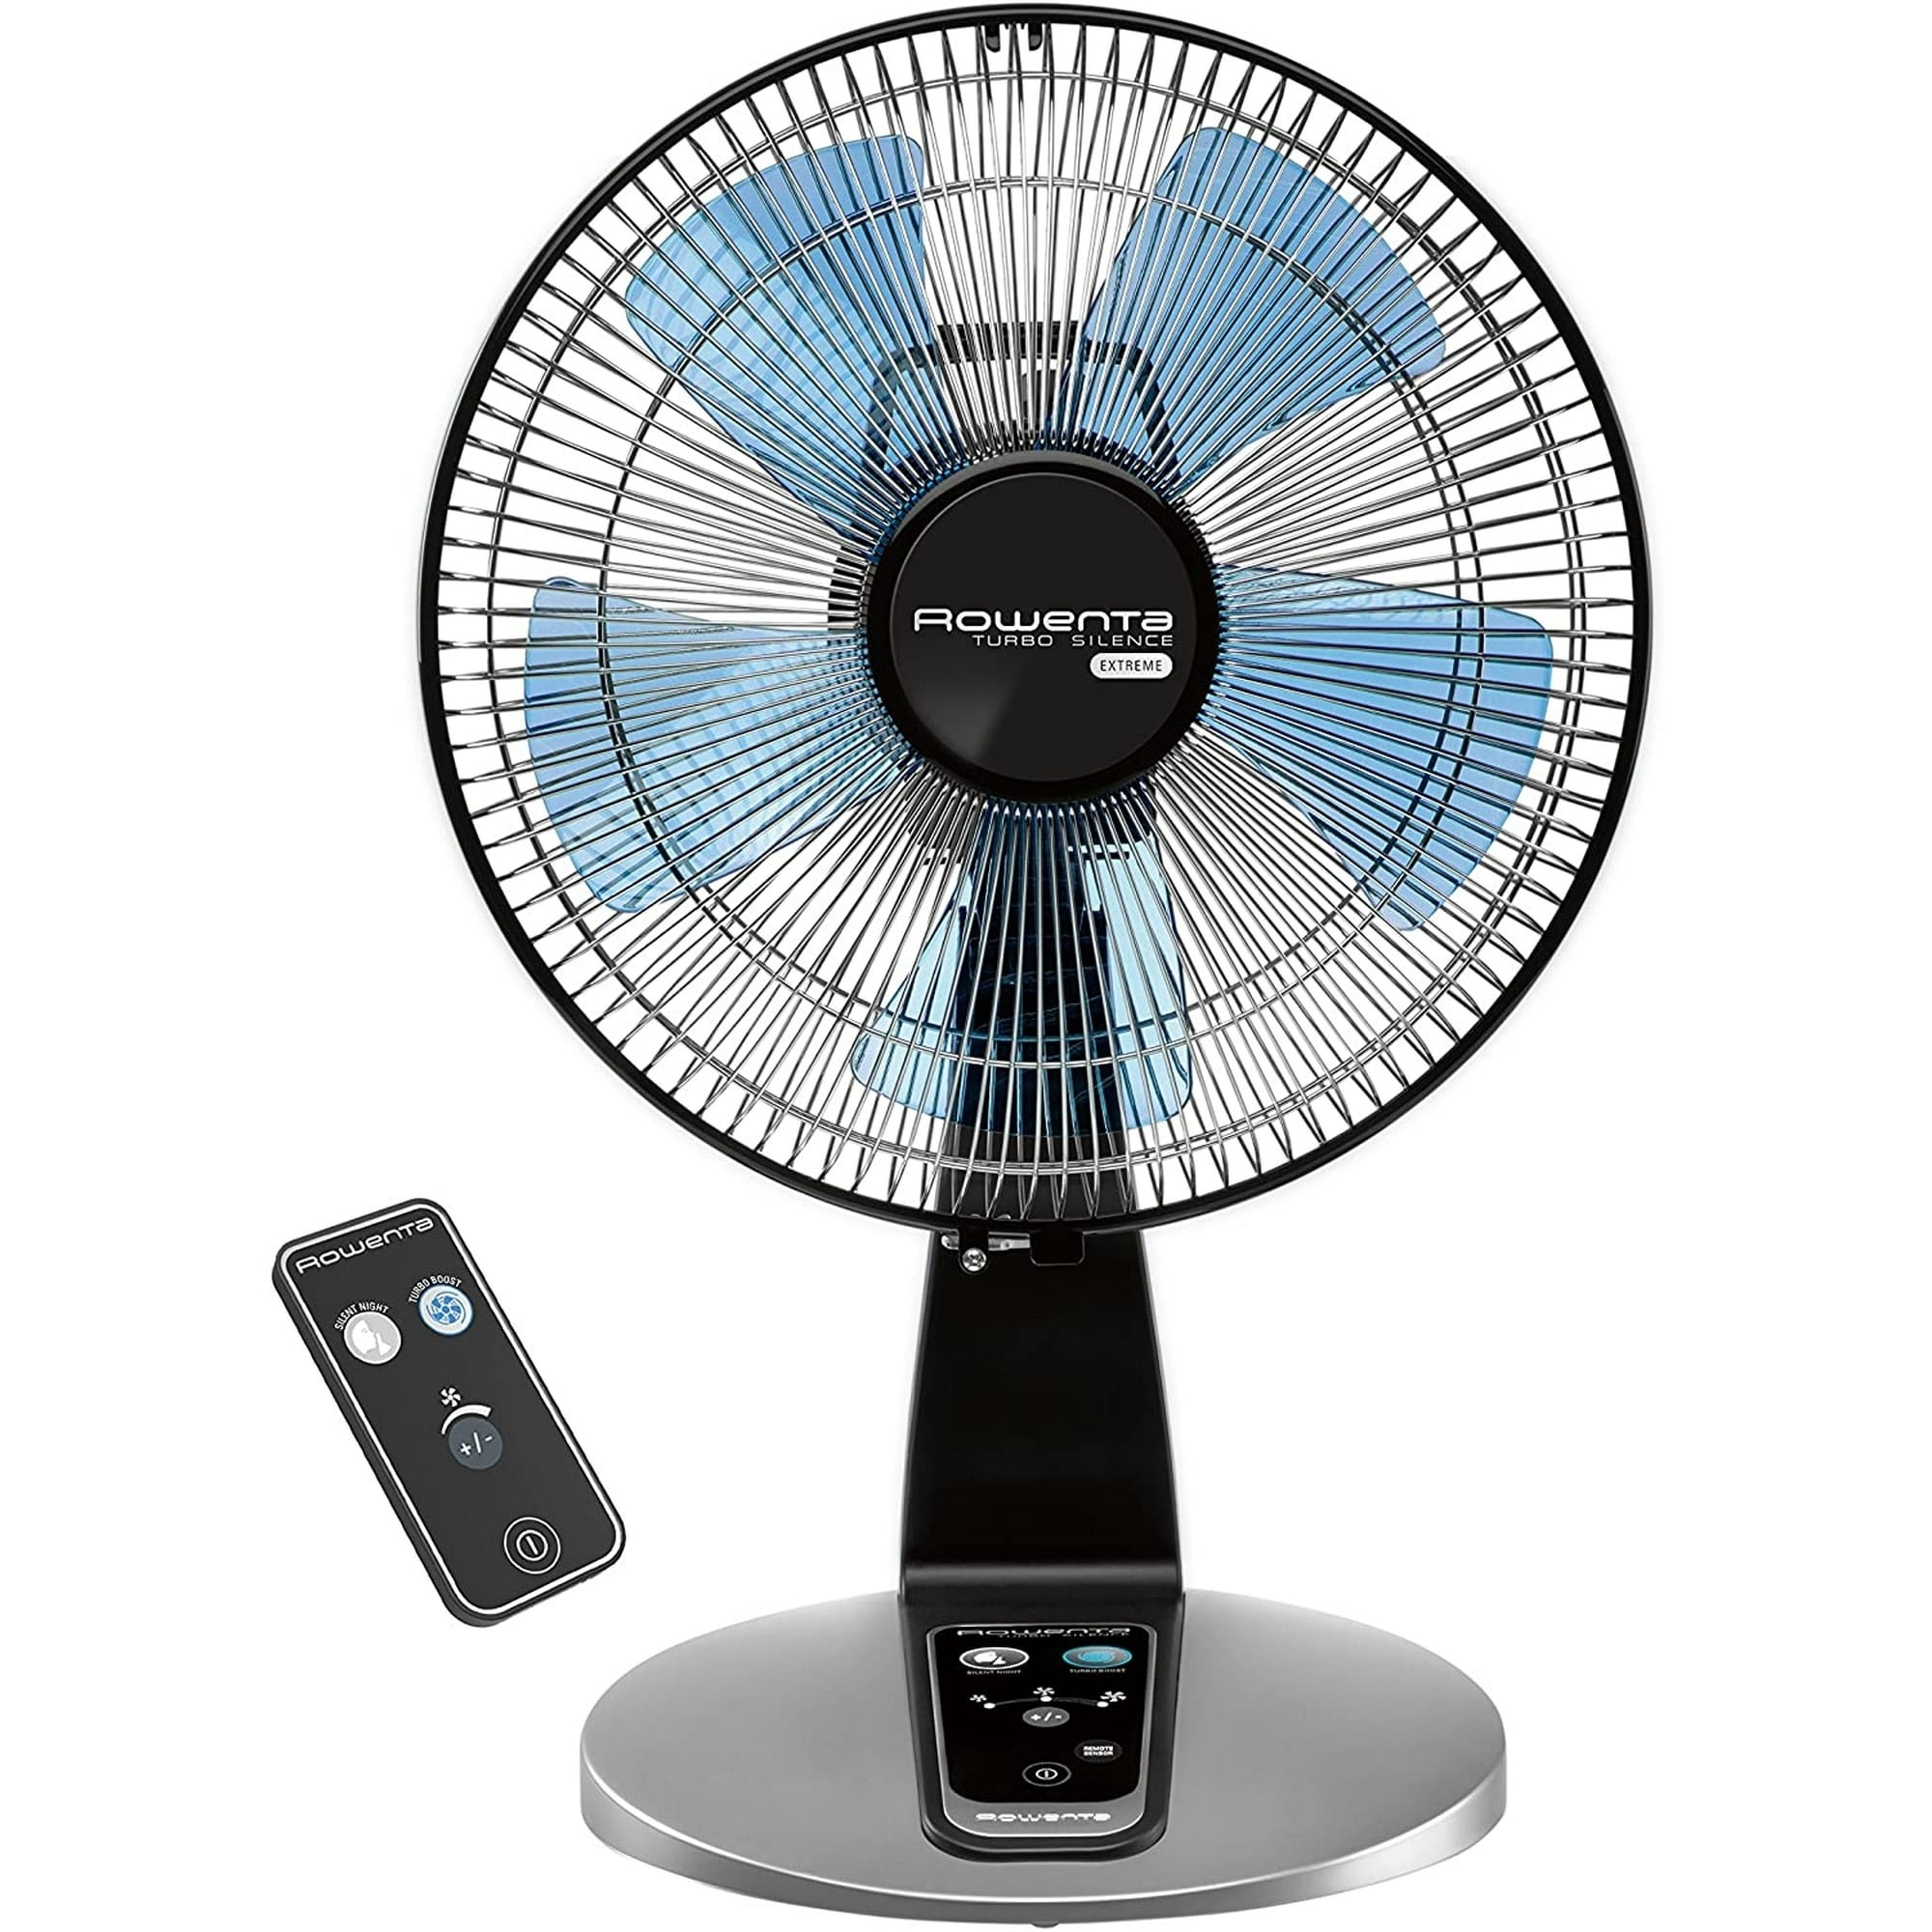 the fan and remote